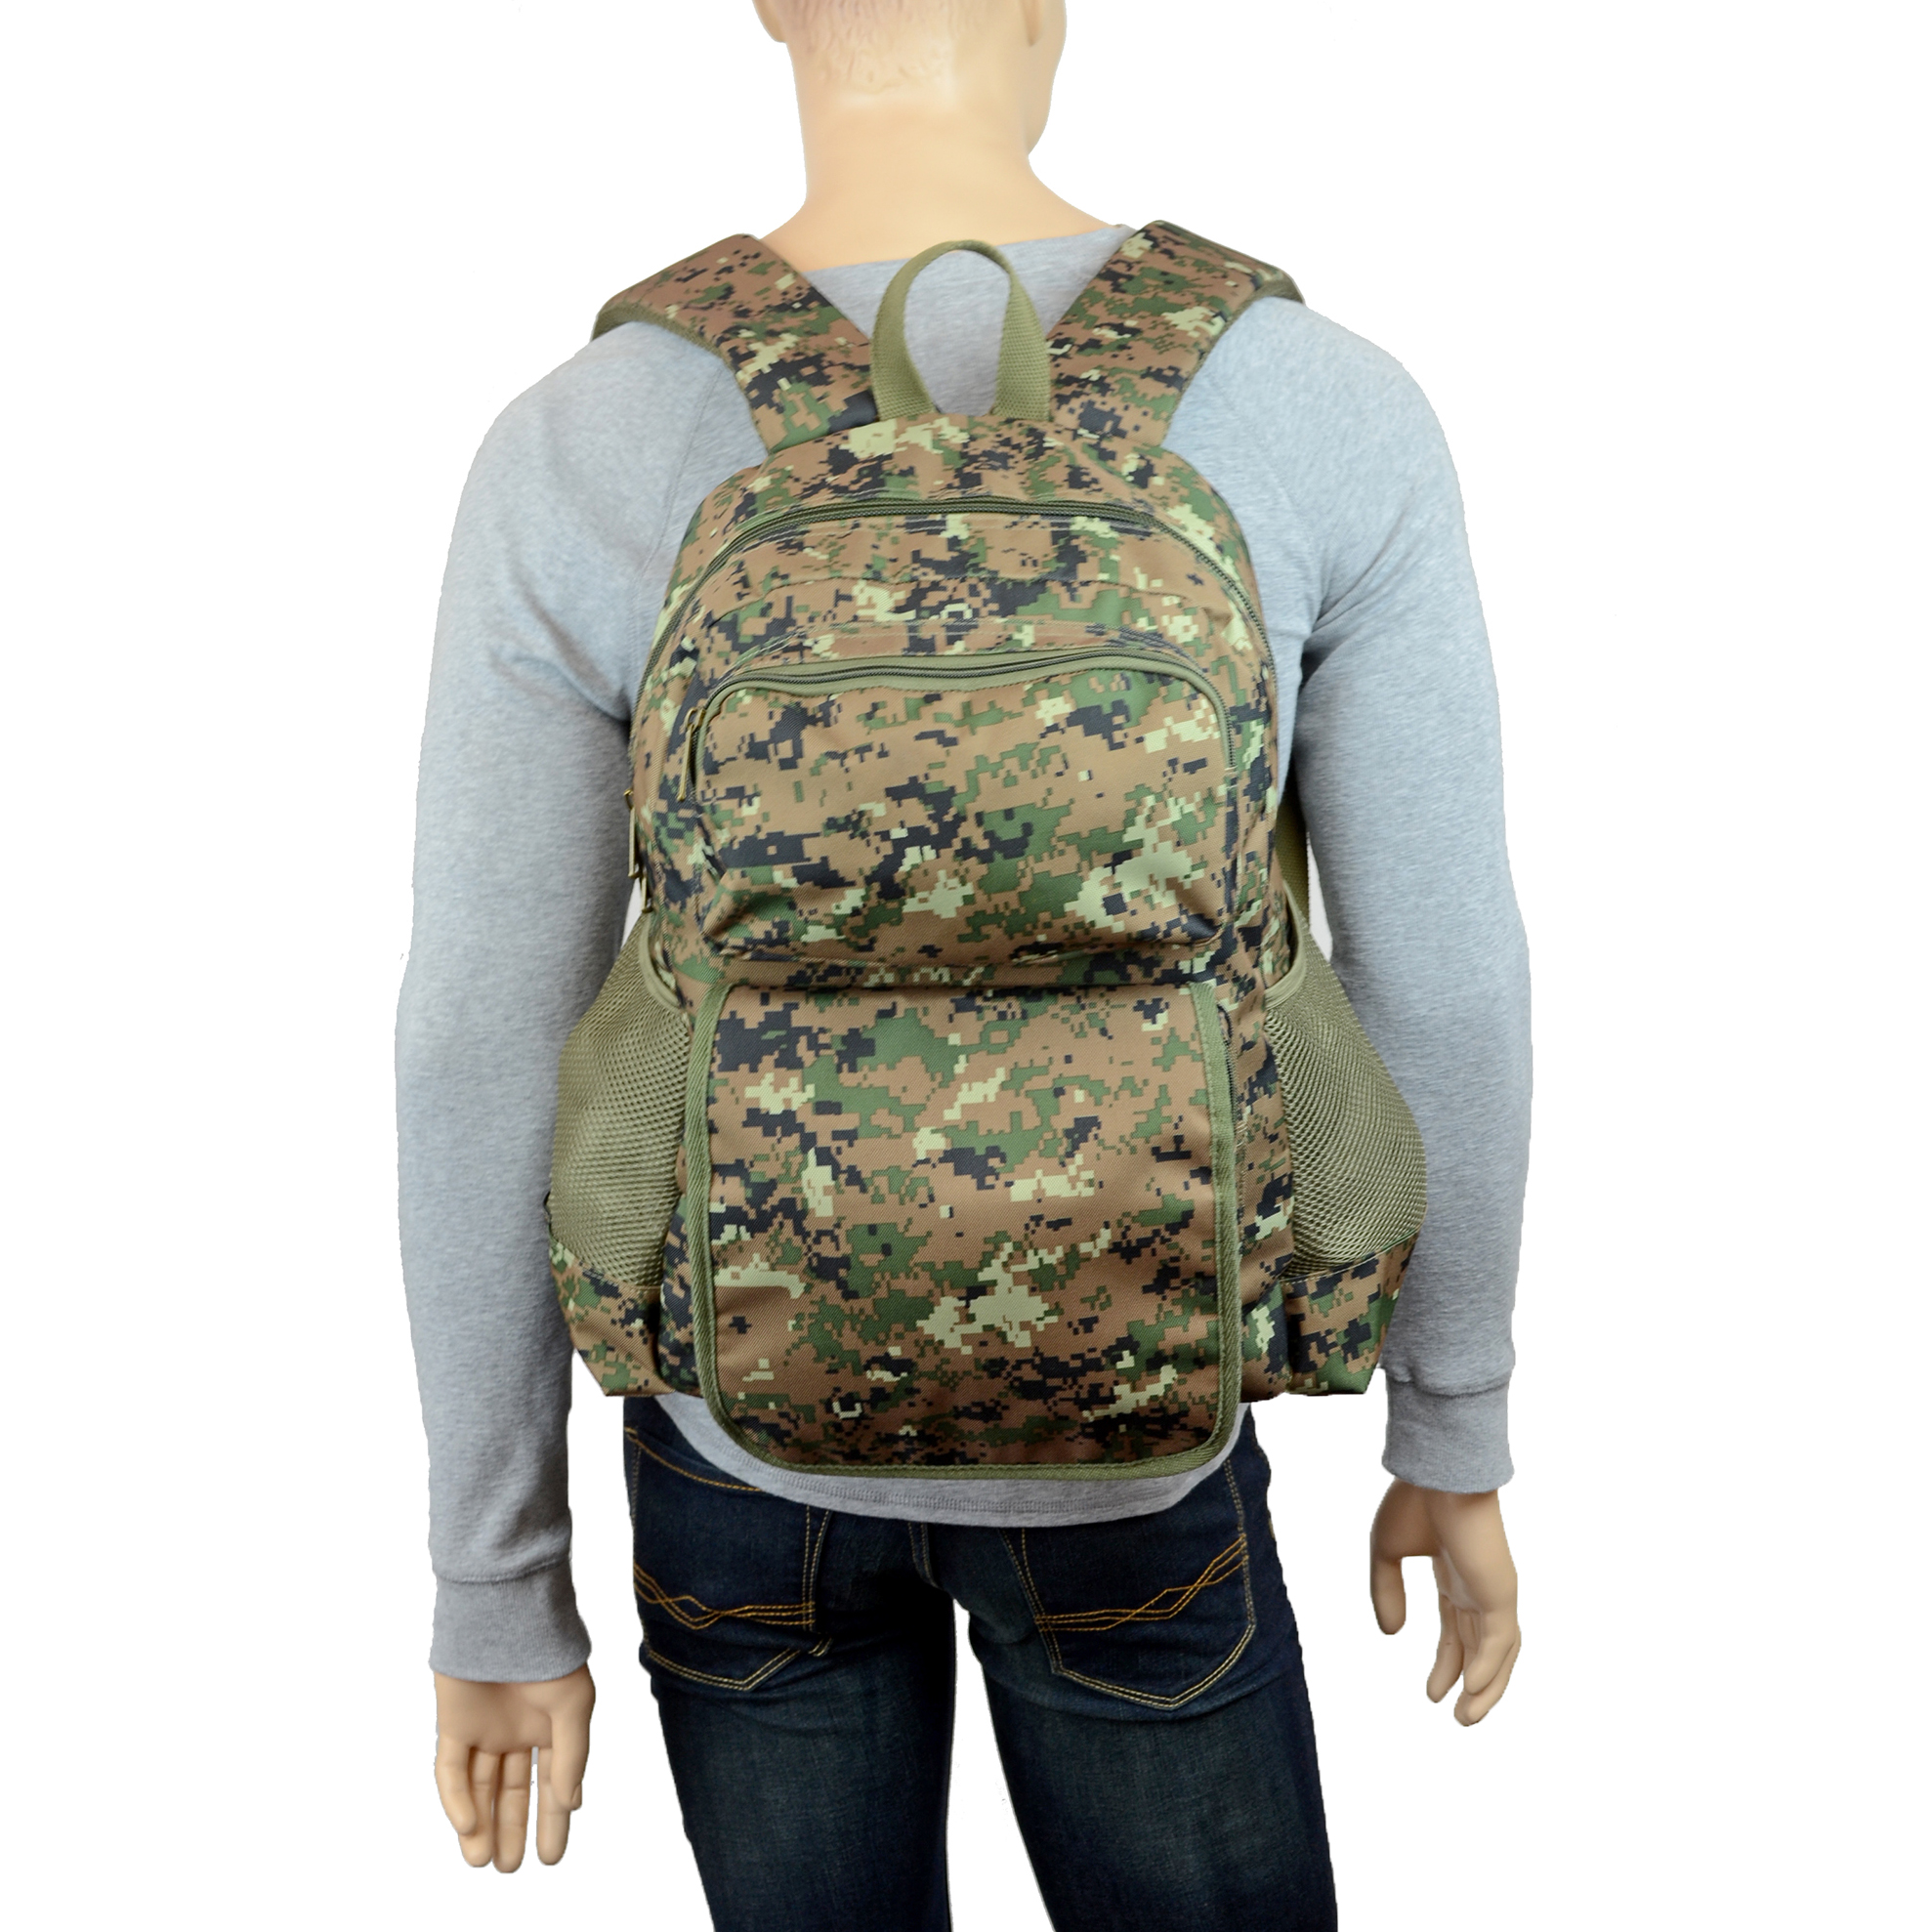 Montauk Leather Club Military Camouflage Woodland Print Water Resistant Backpack with 1Front Zipper Pocket and 1 Velcro Flap Zipper Pocket - image 2 of 4